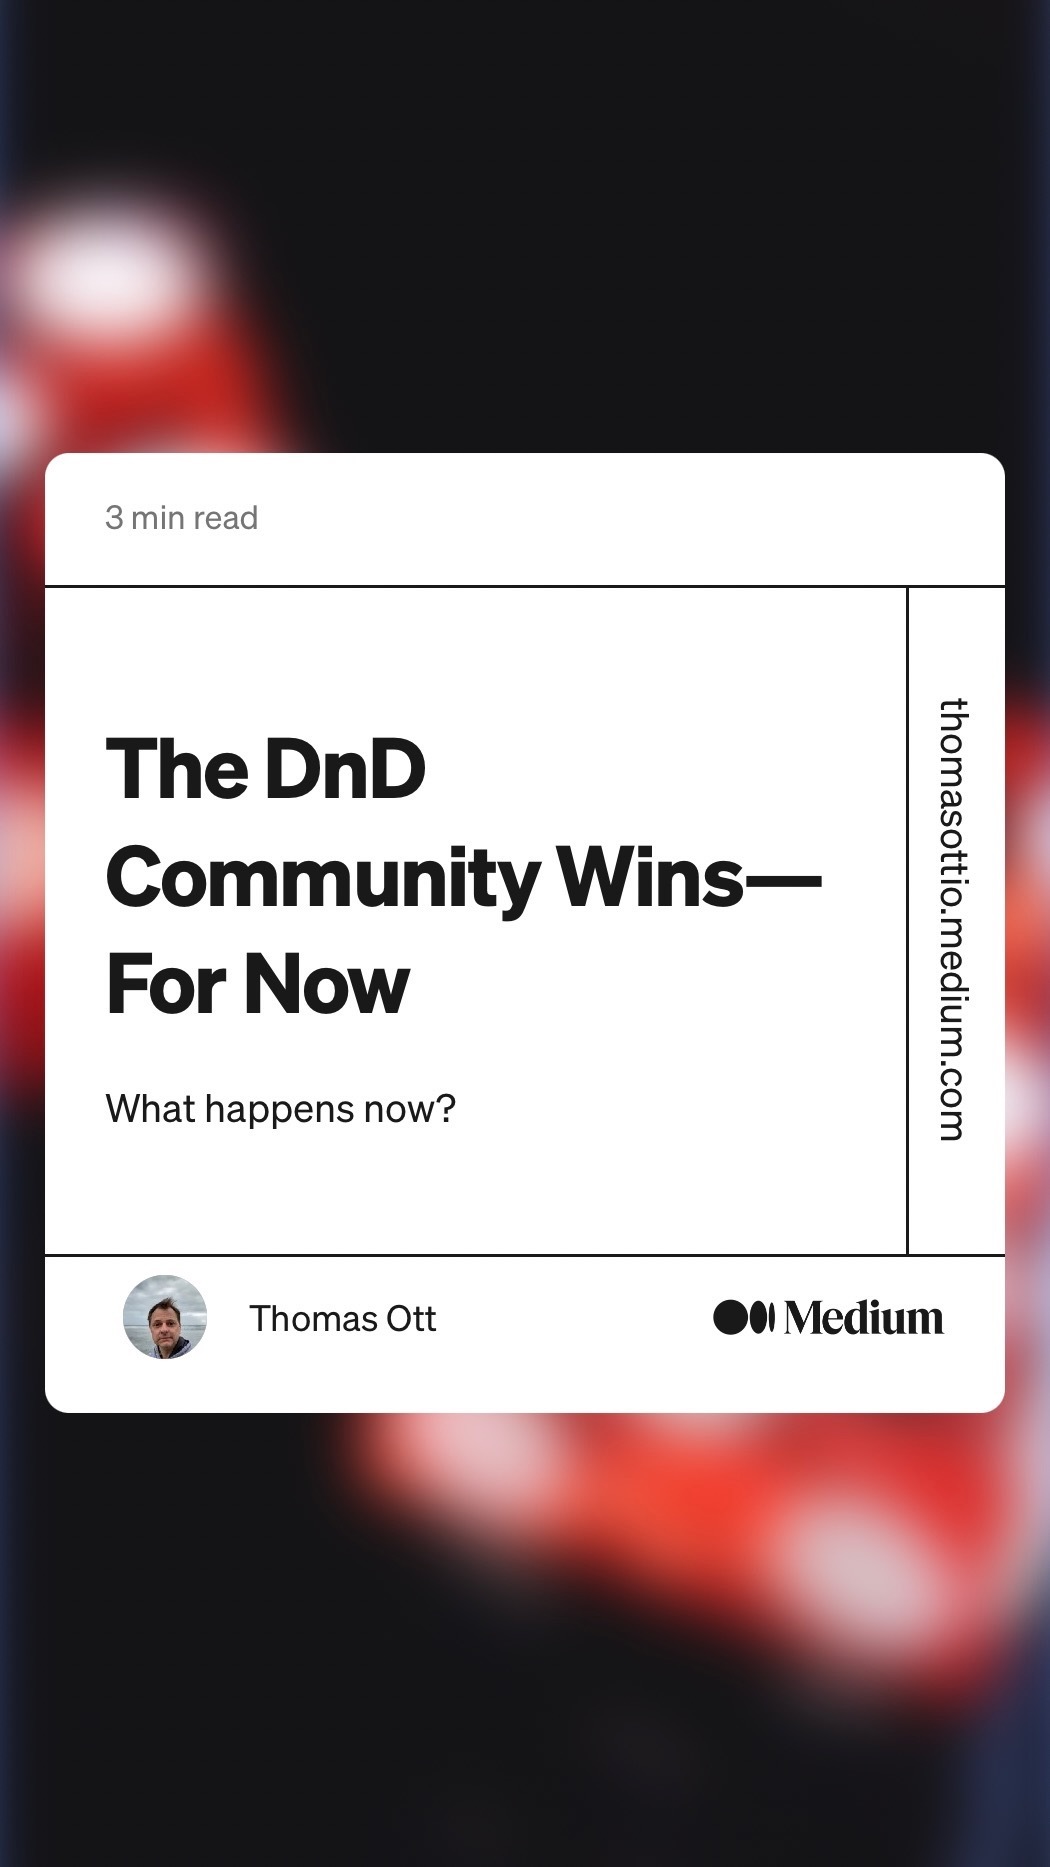 The DnD Community Wins - For Now